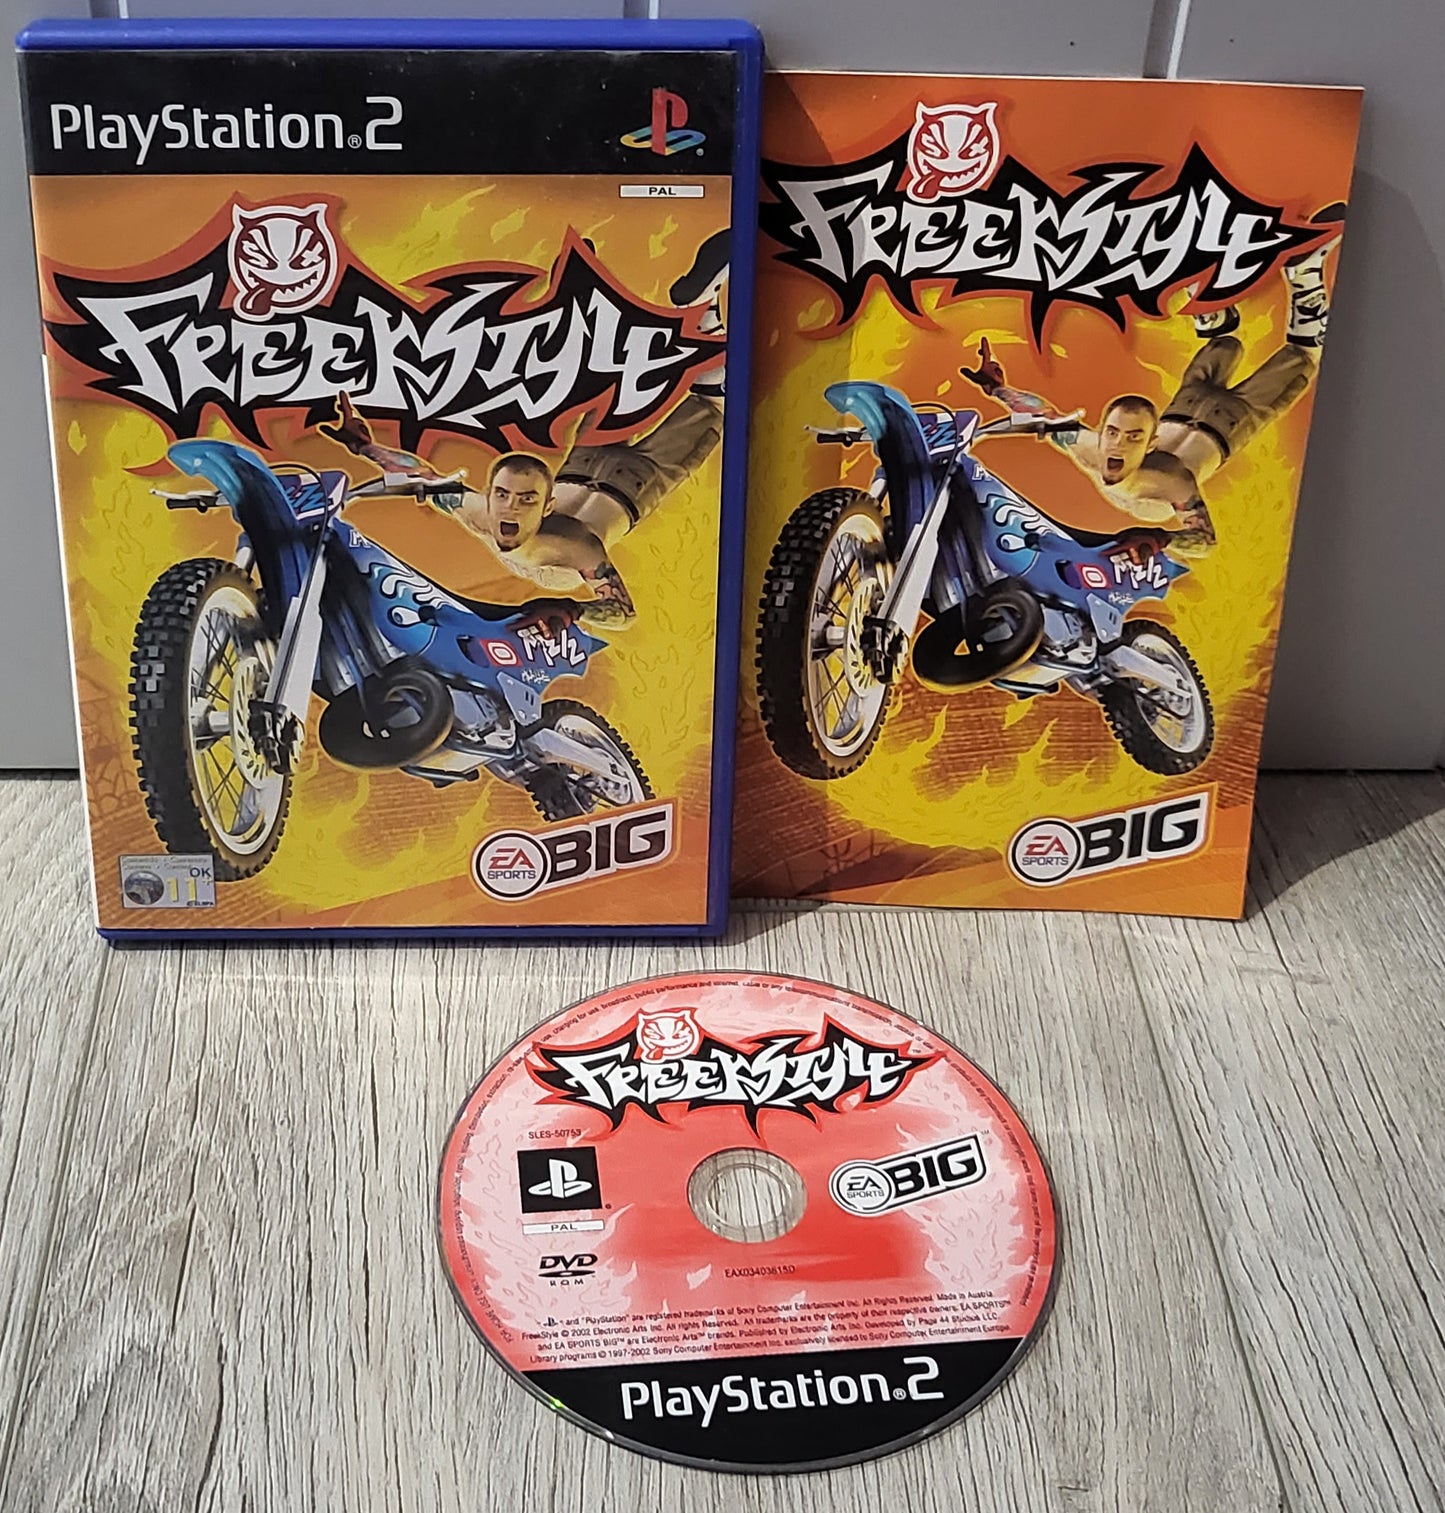 Freekstyle Sony Playstation 2 (PS2) Game